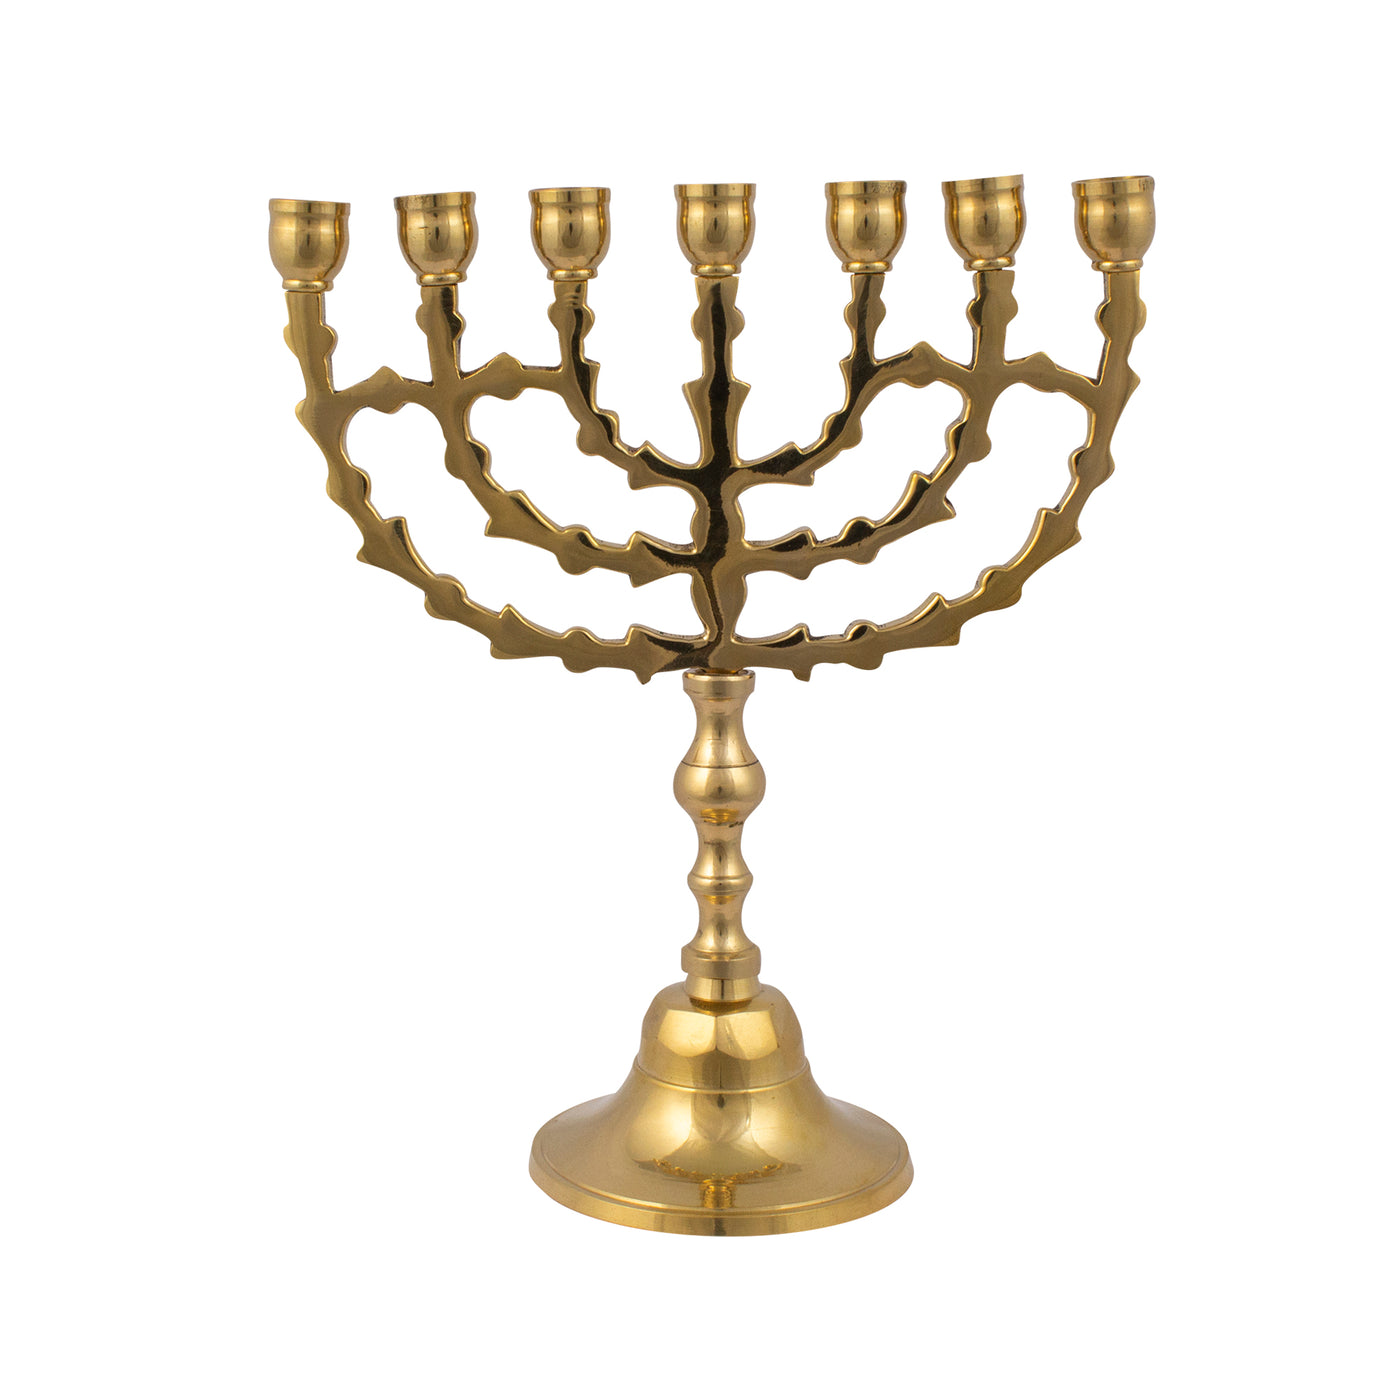 Menorah decorated with leaves with a shiny brass finish /8 inches - 20cm